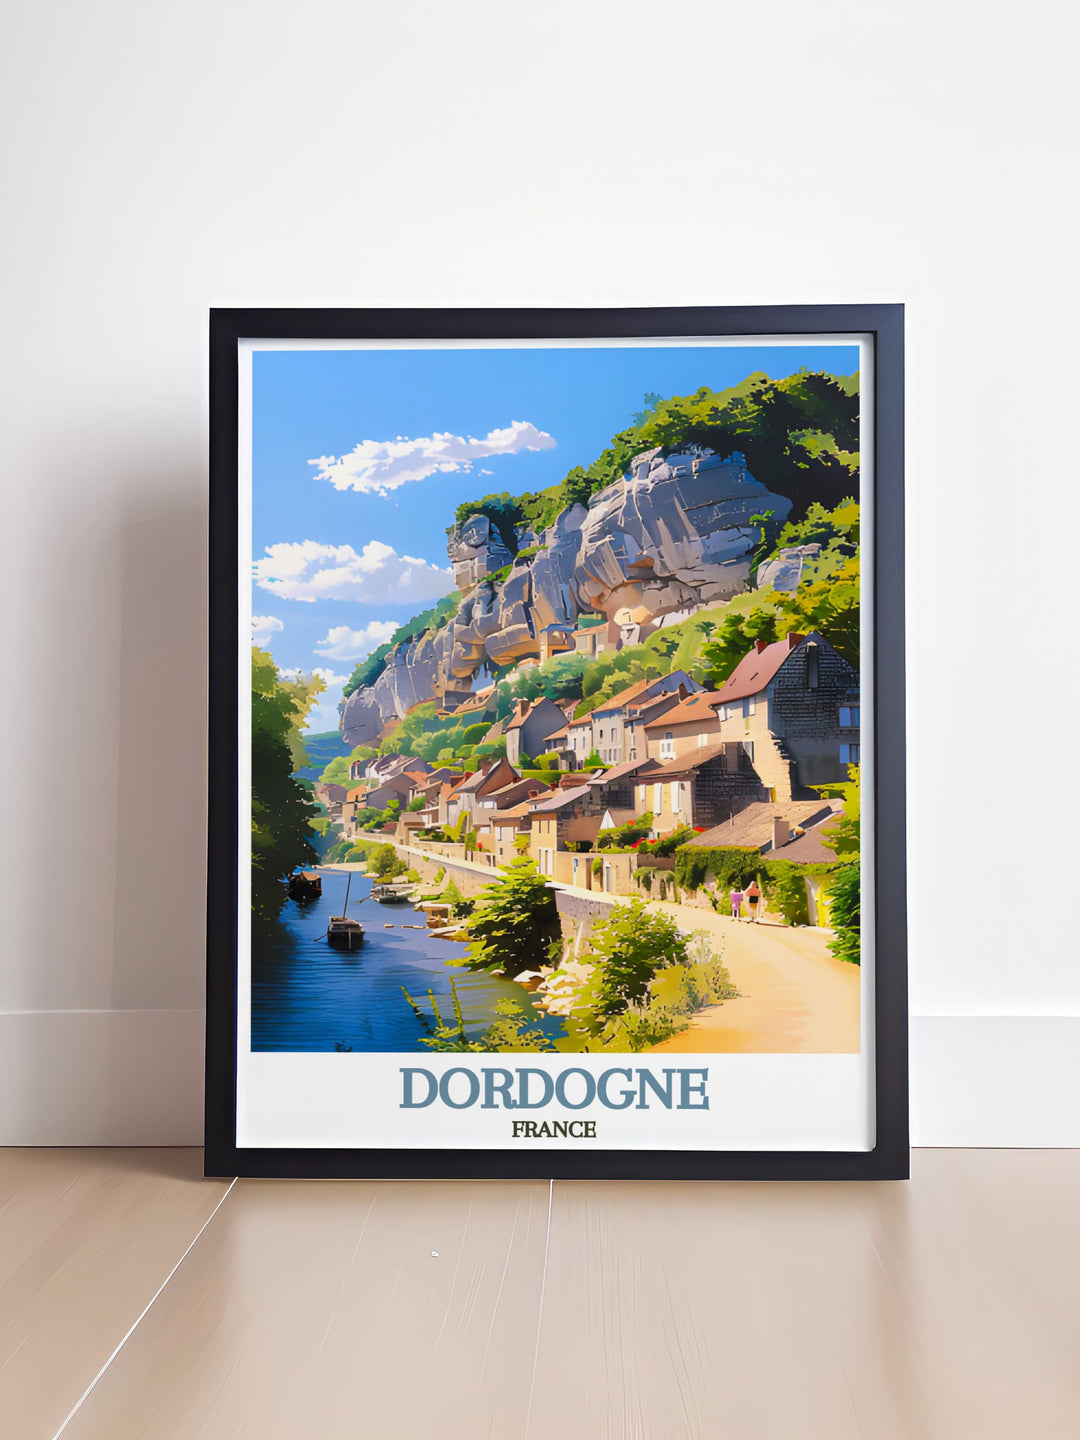 Dordognes rich history is celebrated in this poster, depicting the regions ancient villages and lush landscapes, ideal for art enthusiasts and history lovers.